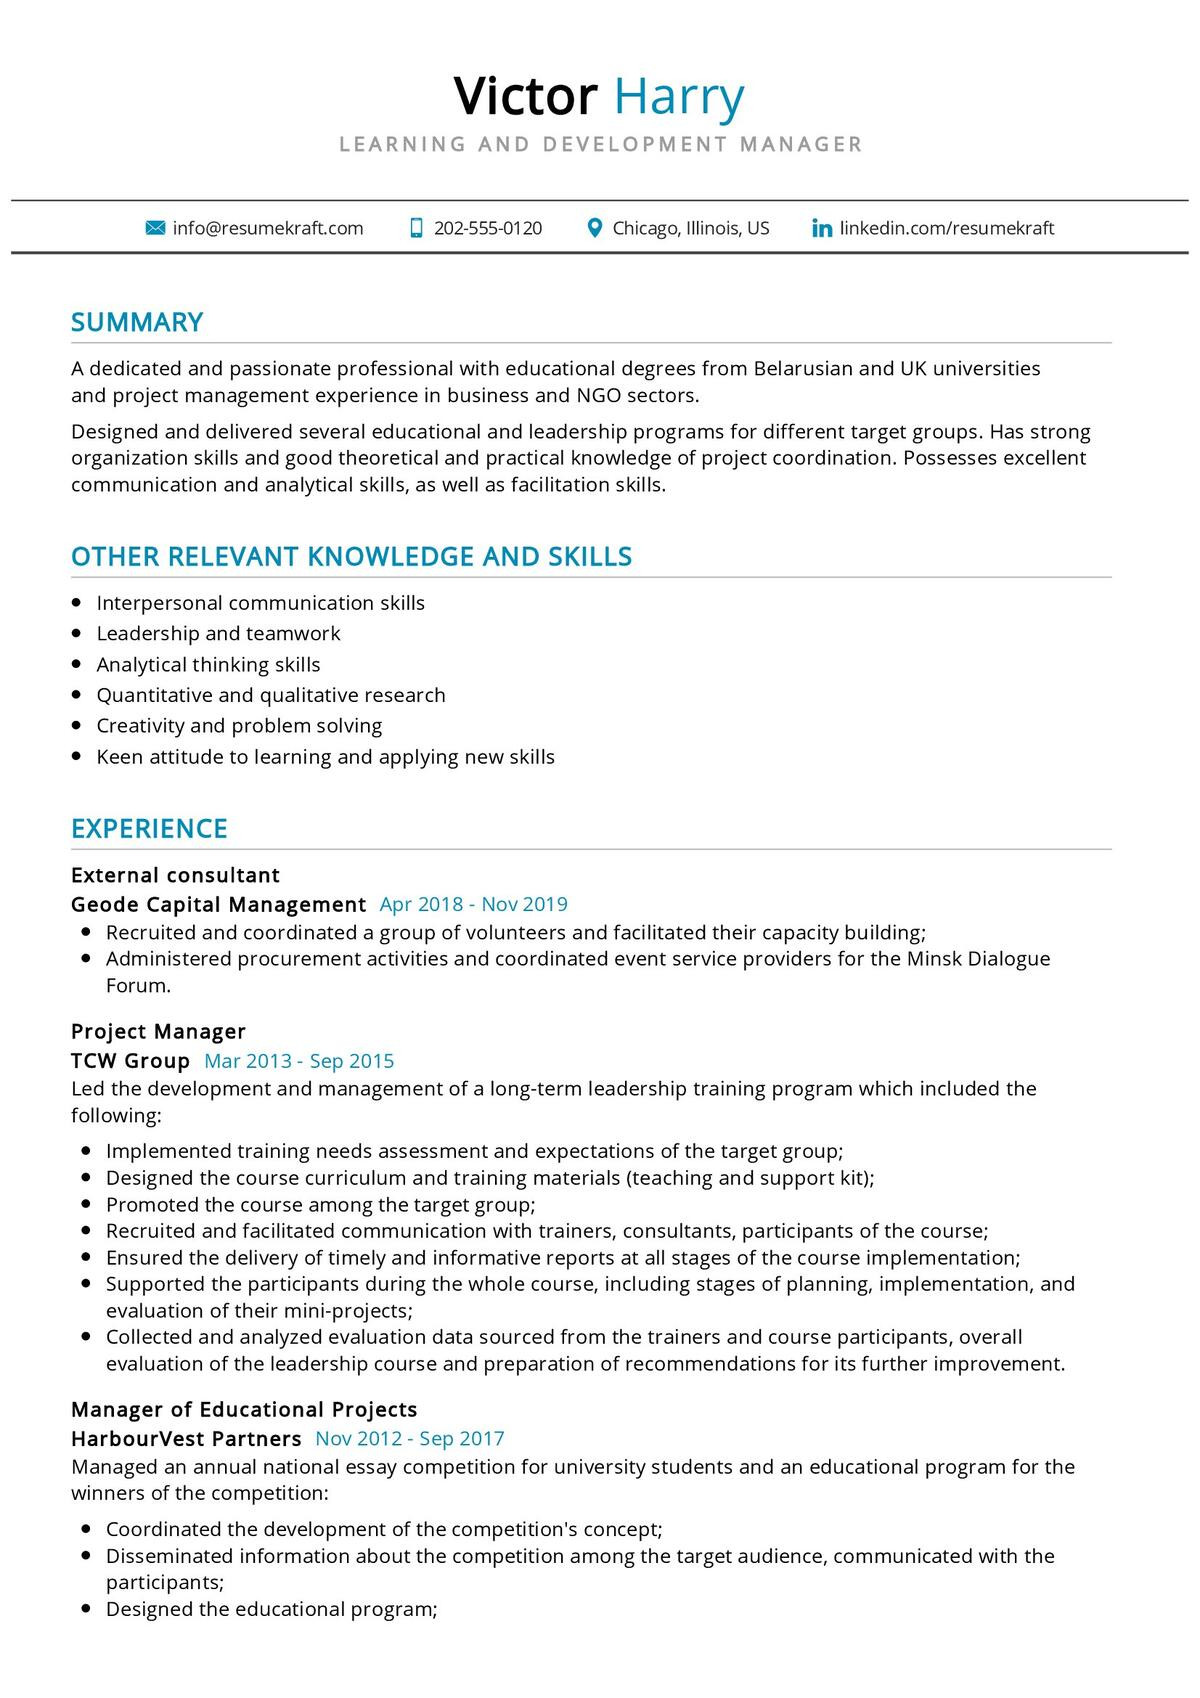 Training and Development Director Resume Sample Learning and Development Manager Resume 2021 Writing Guide …